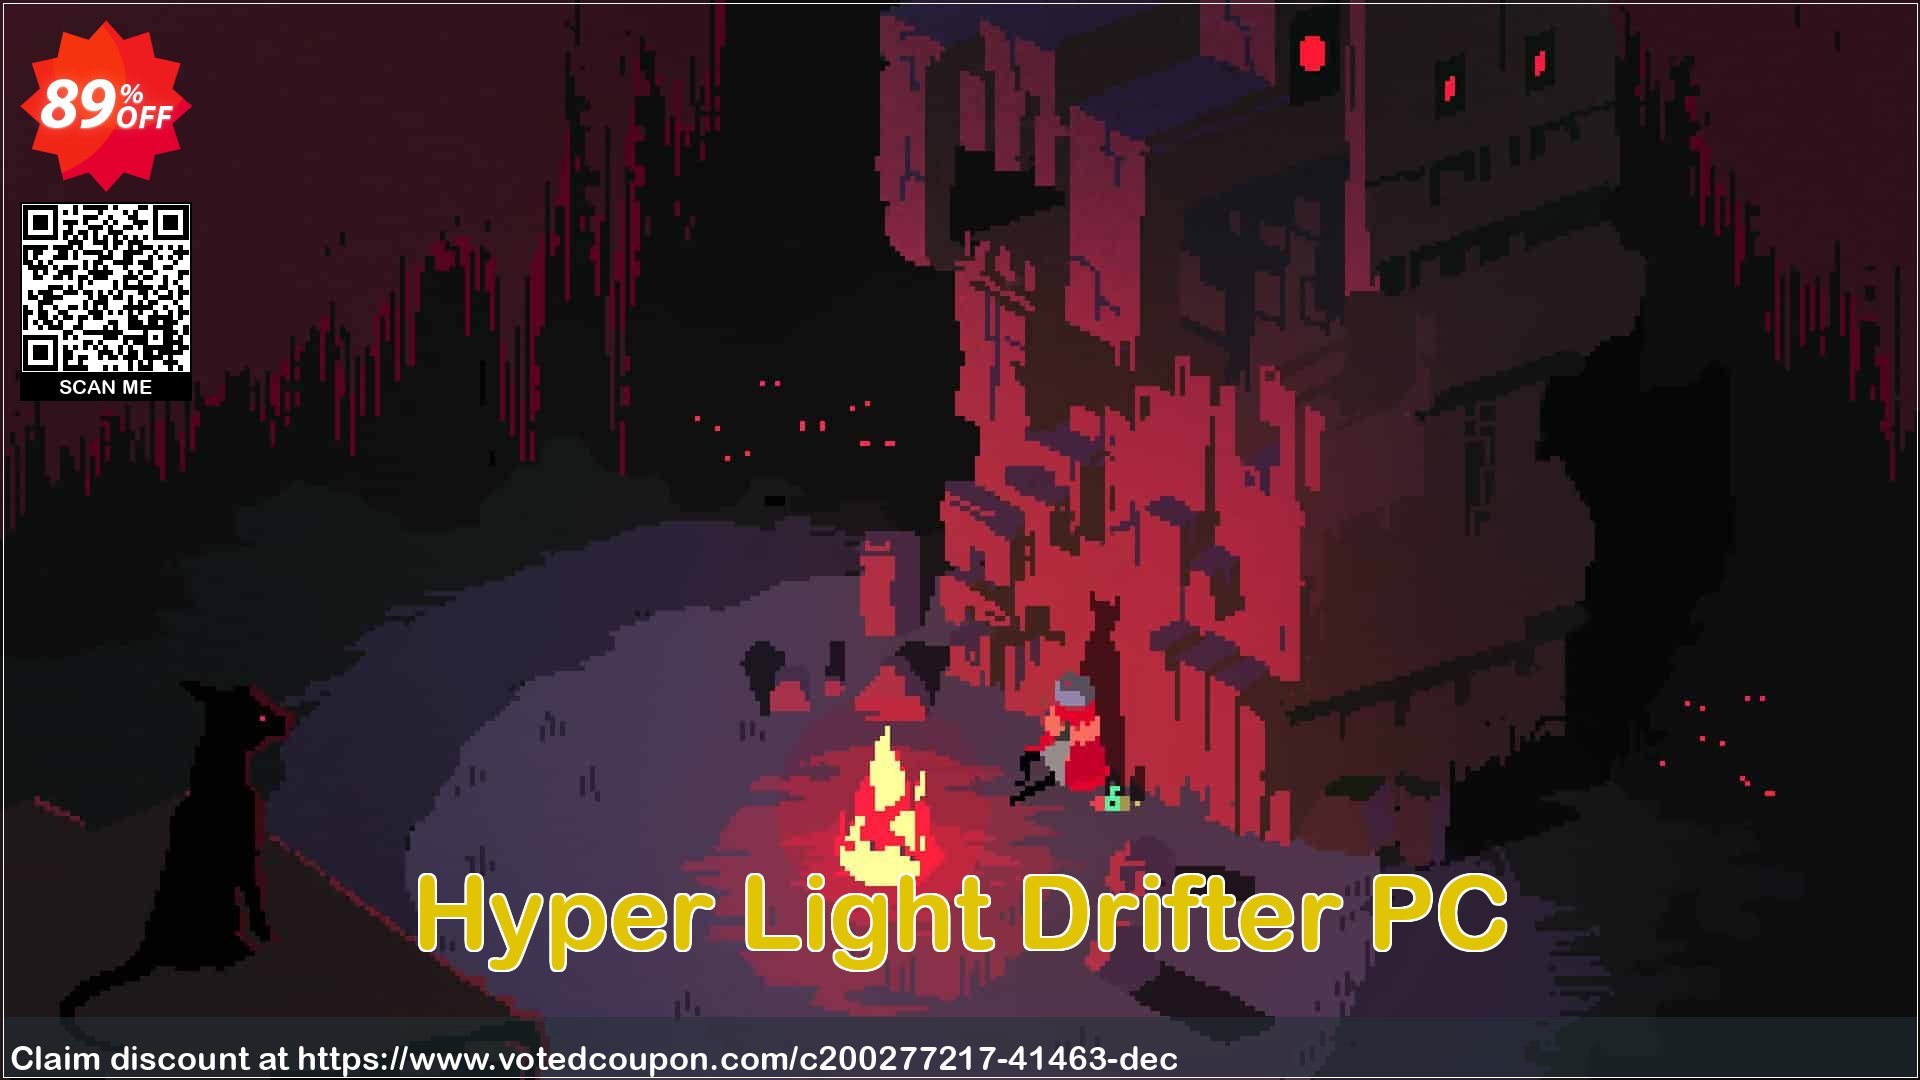 Hyper Light Drifter PC Coupon Code May 2024, 89% OFF - VotedCoupon